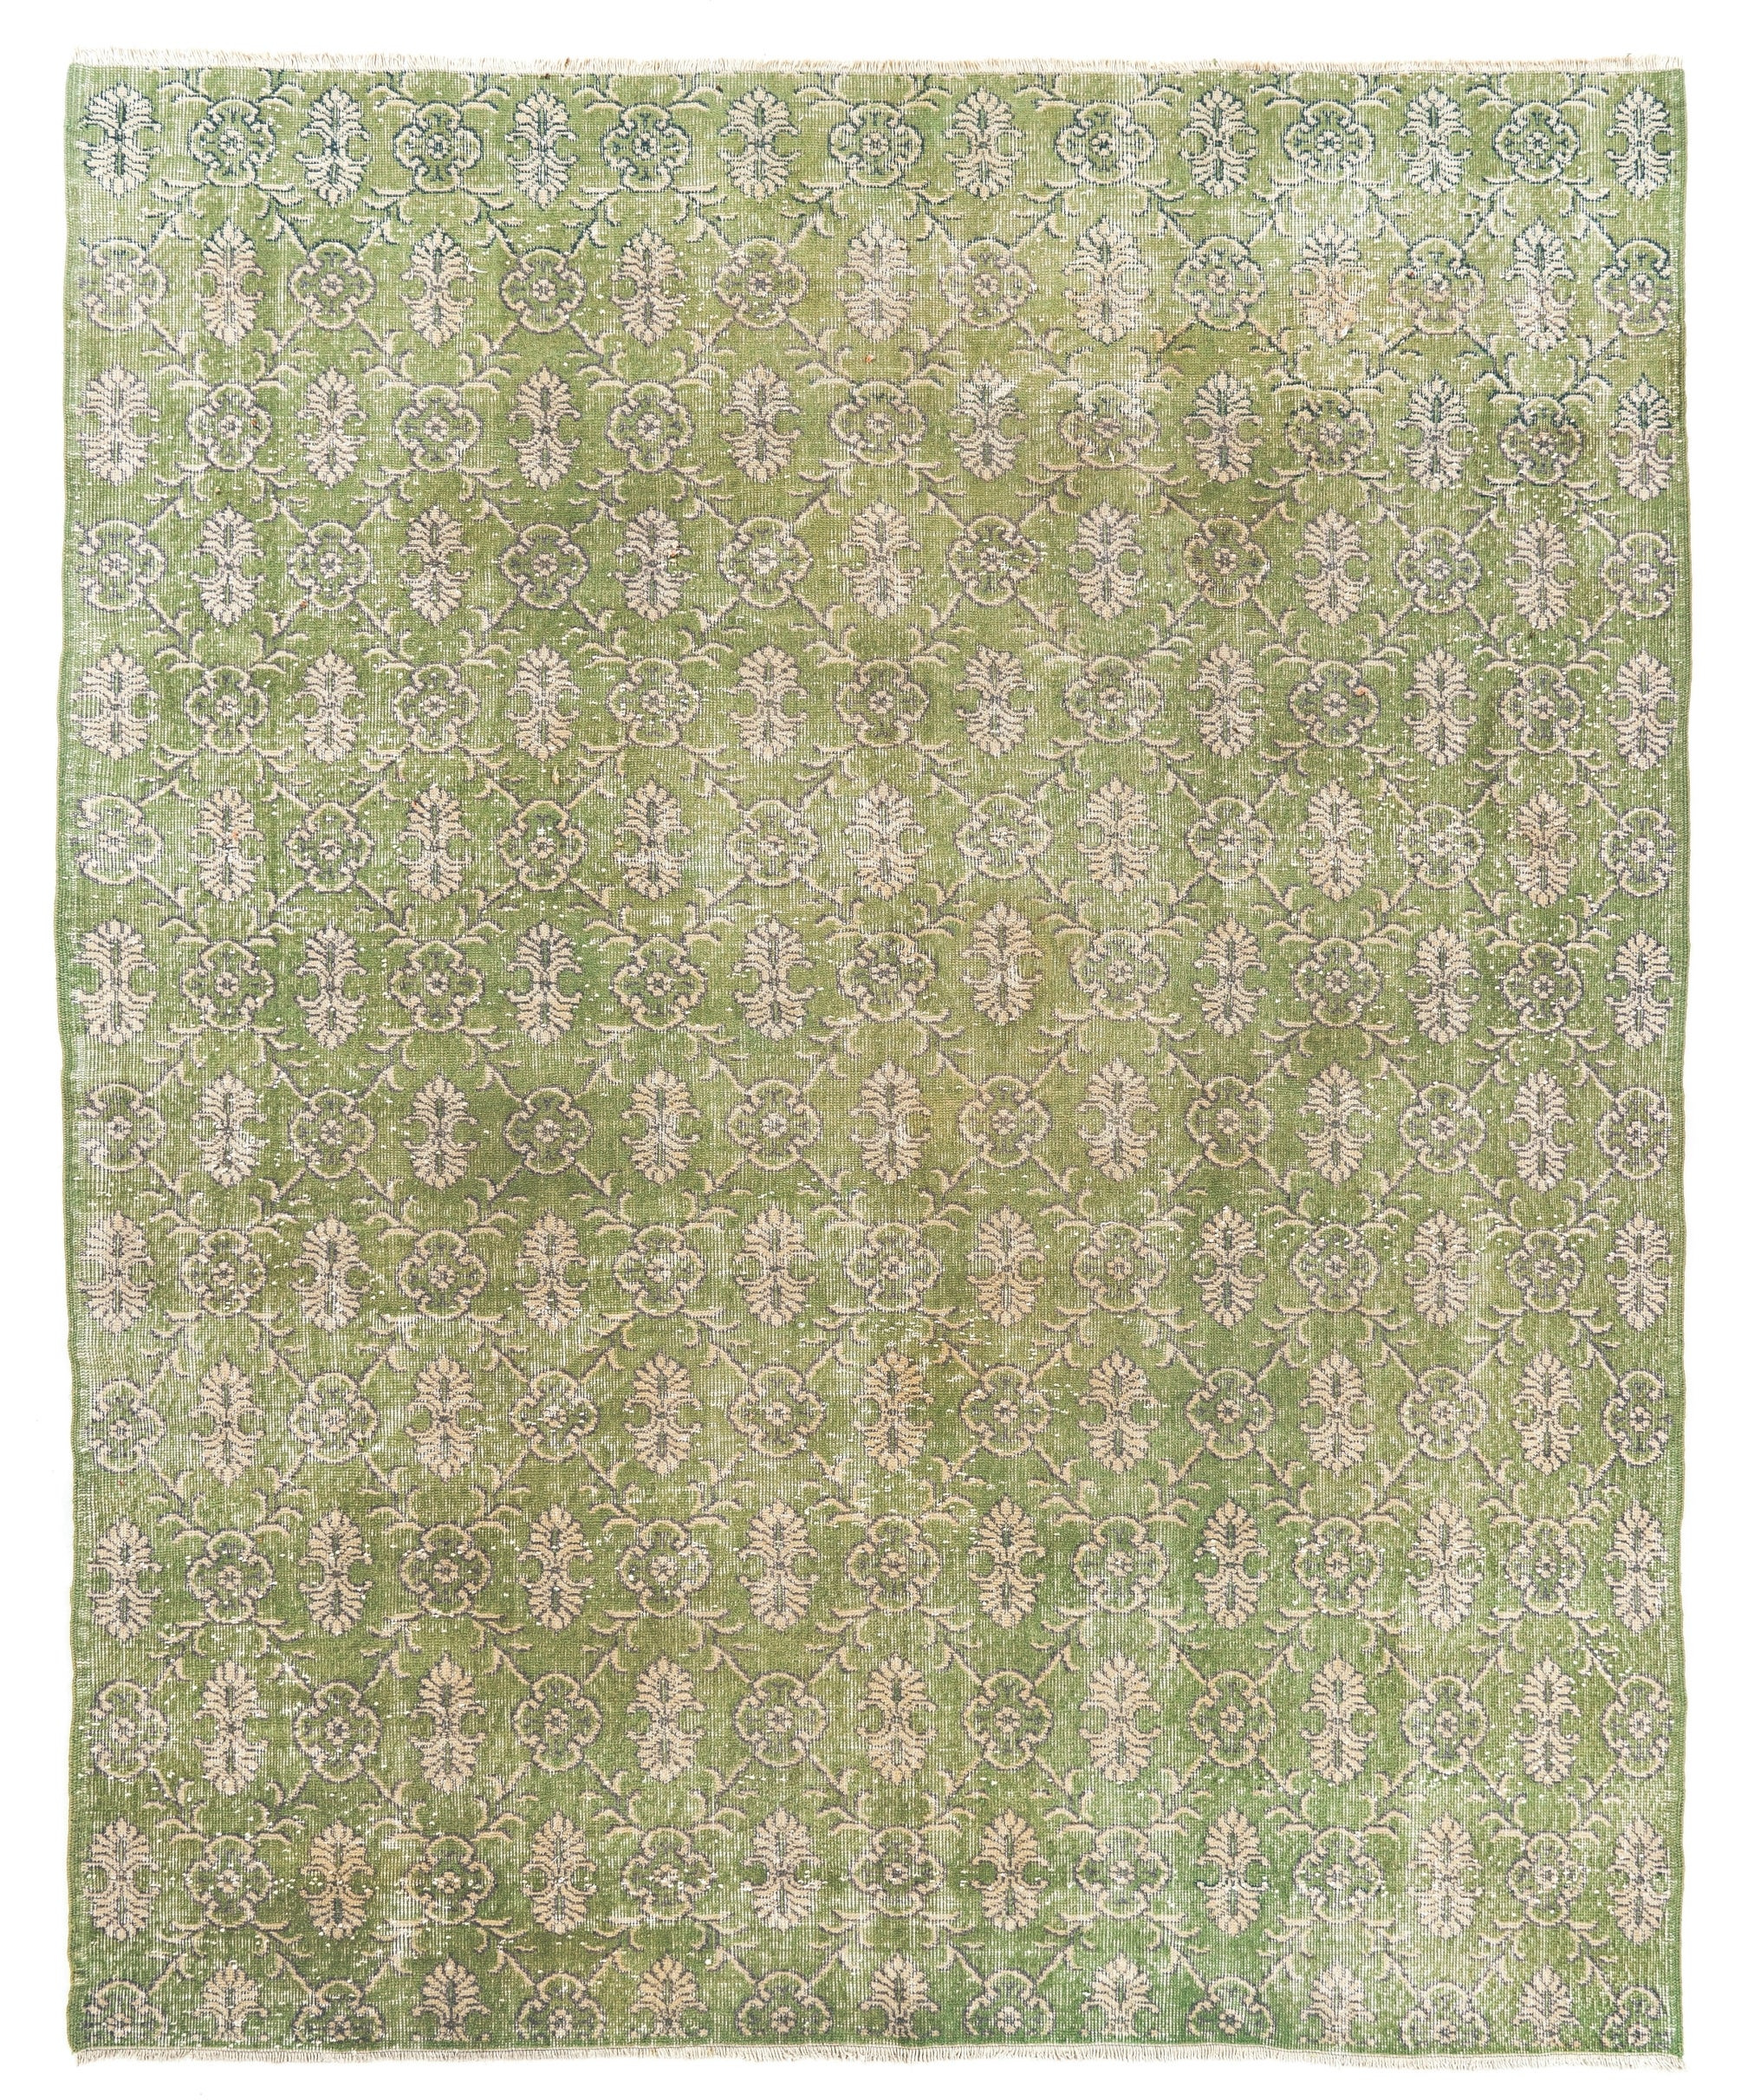 7.5x9 Ft Floral Mid-20th Century Hand-Knotted Anatolian Wool Area Rug in Green